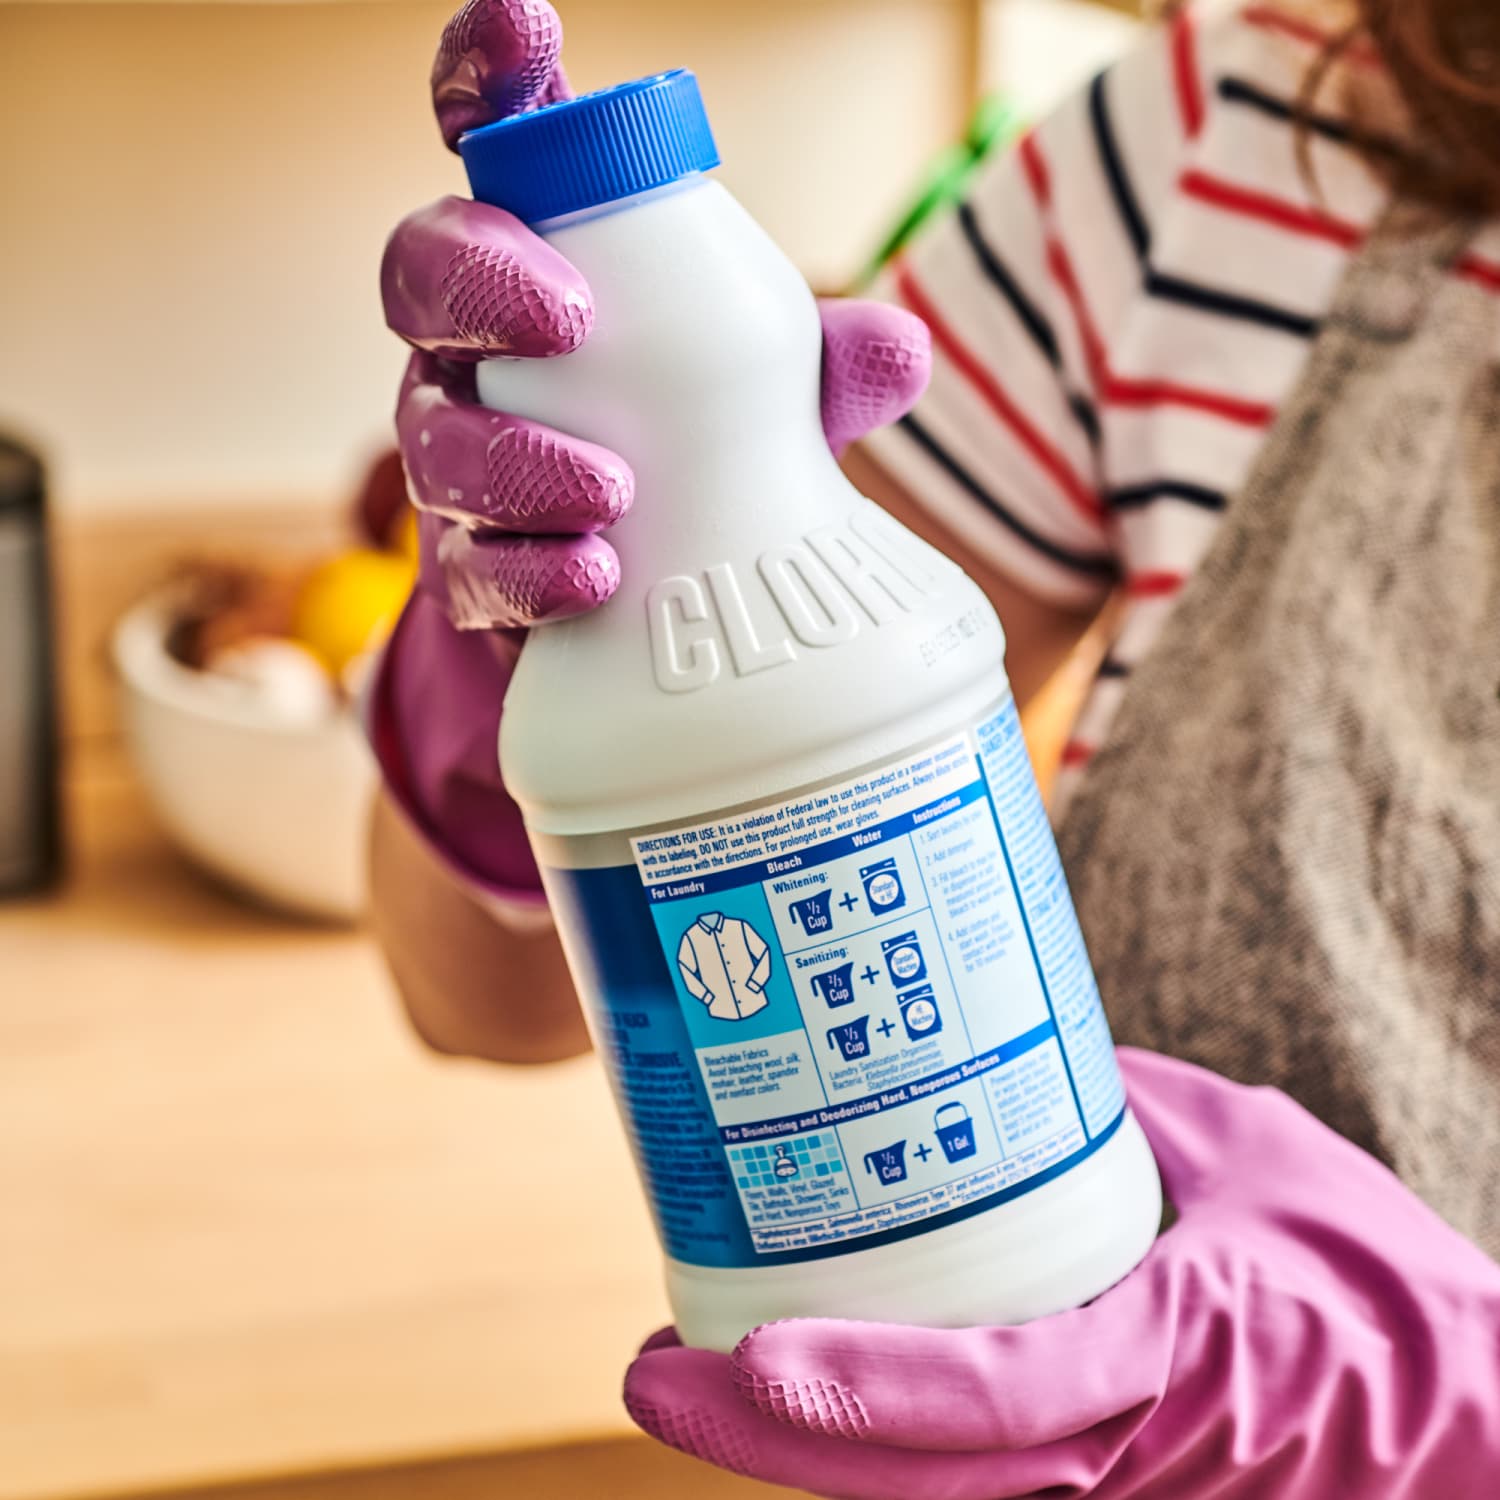 Why I'll Never (Ever) Stop Cleaning with Bleach